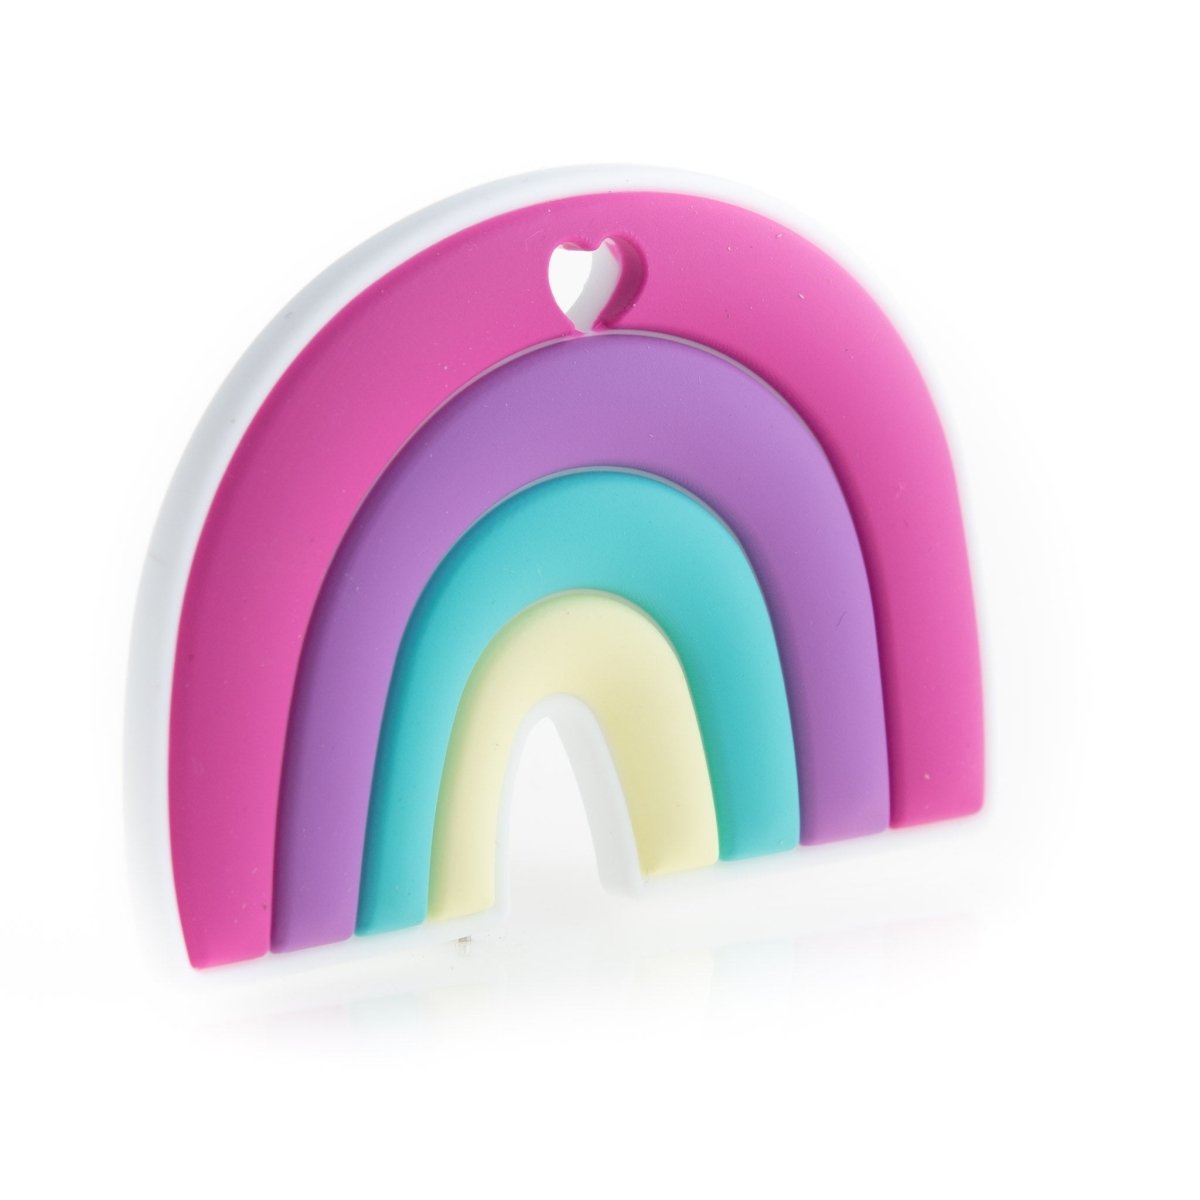 Silicone Teethers and Pendants Colorful Rainbows Blue Skies from Cara & Co Craft Supply